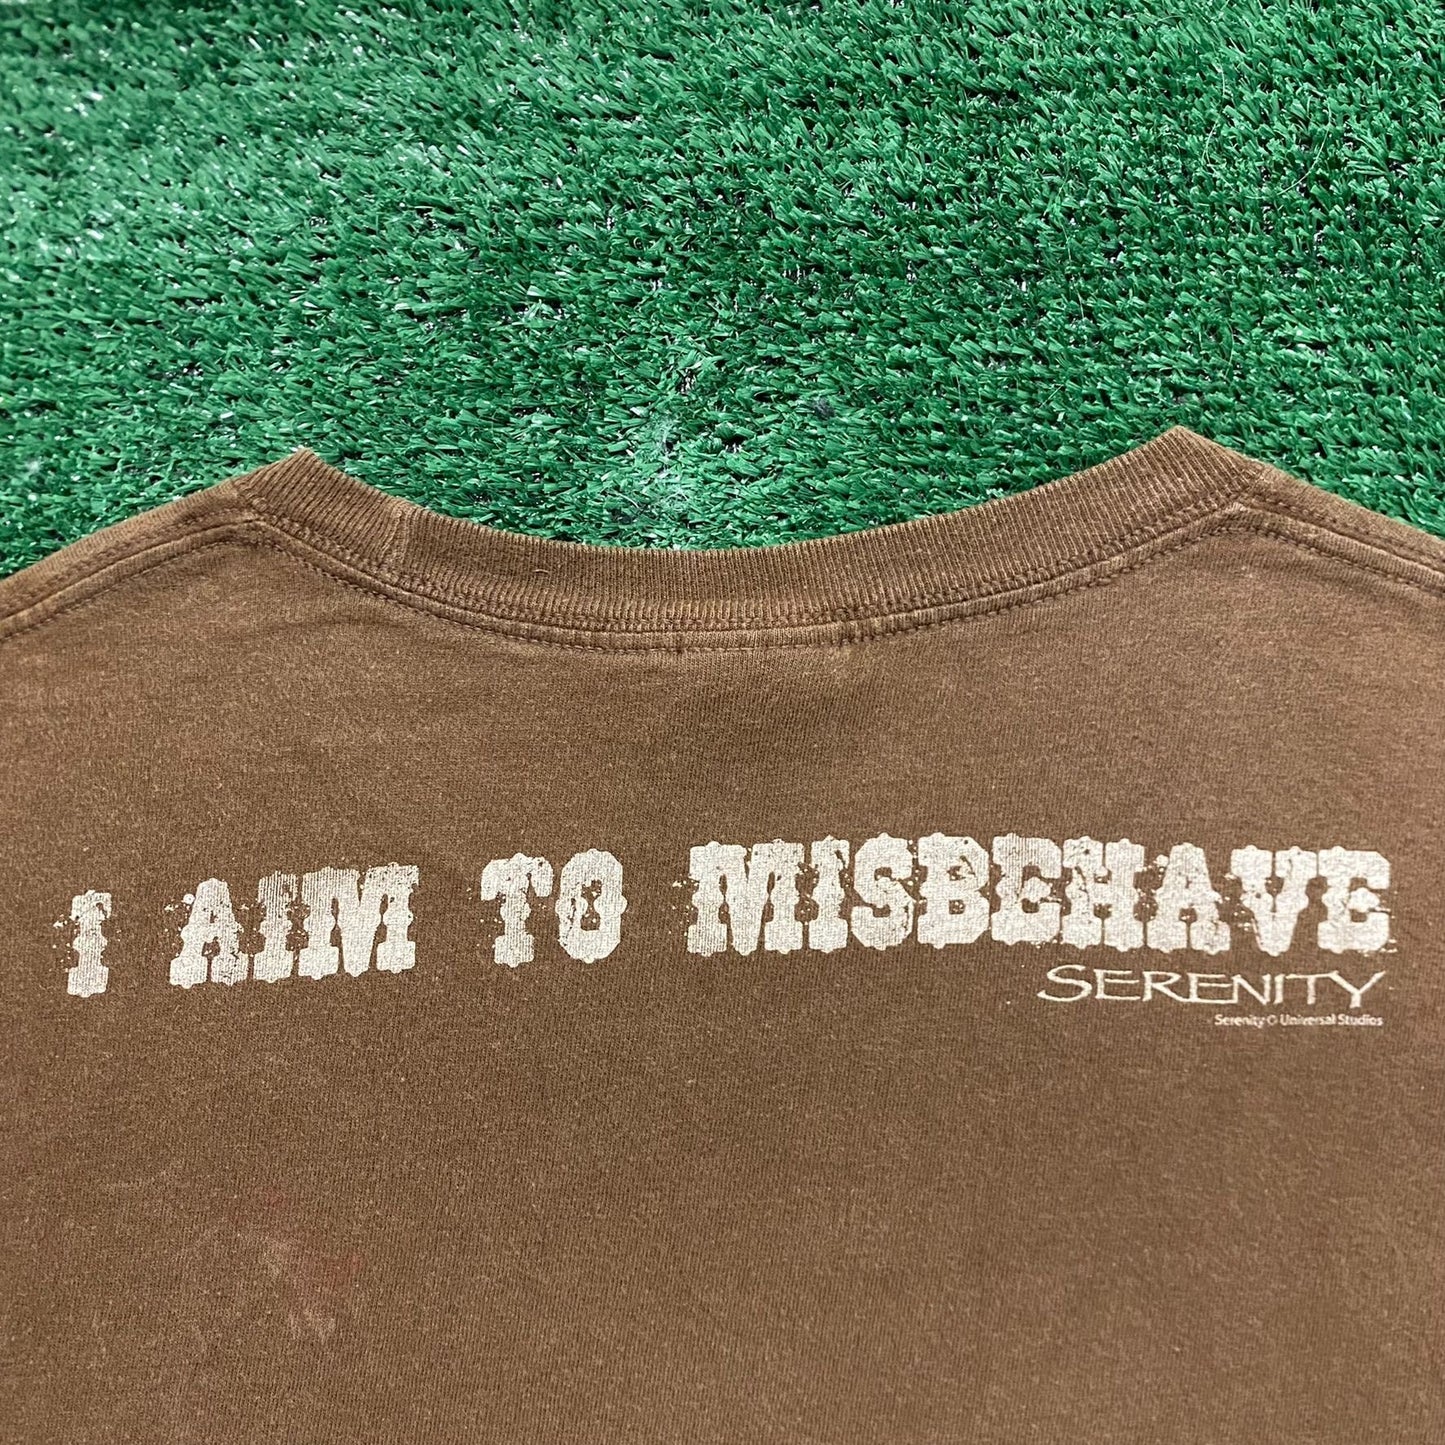 Vintage Y2K Sun Faded Tonal Browncoat Misbehave T-Shirt